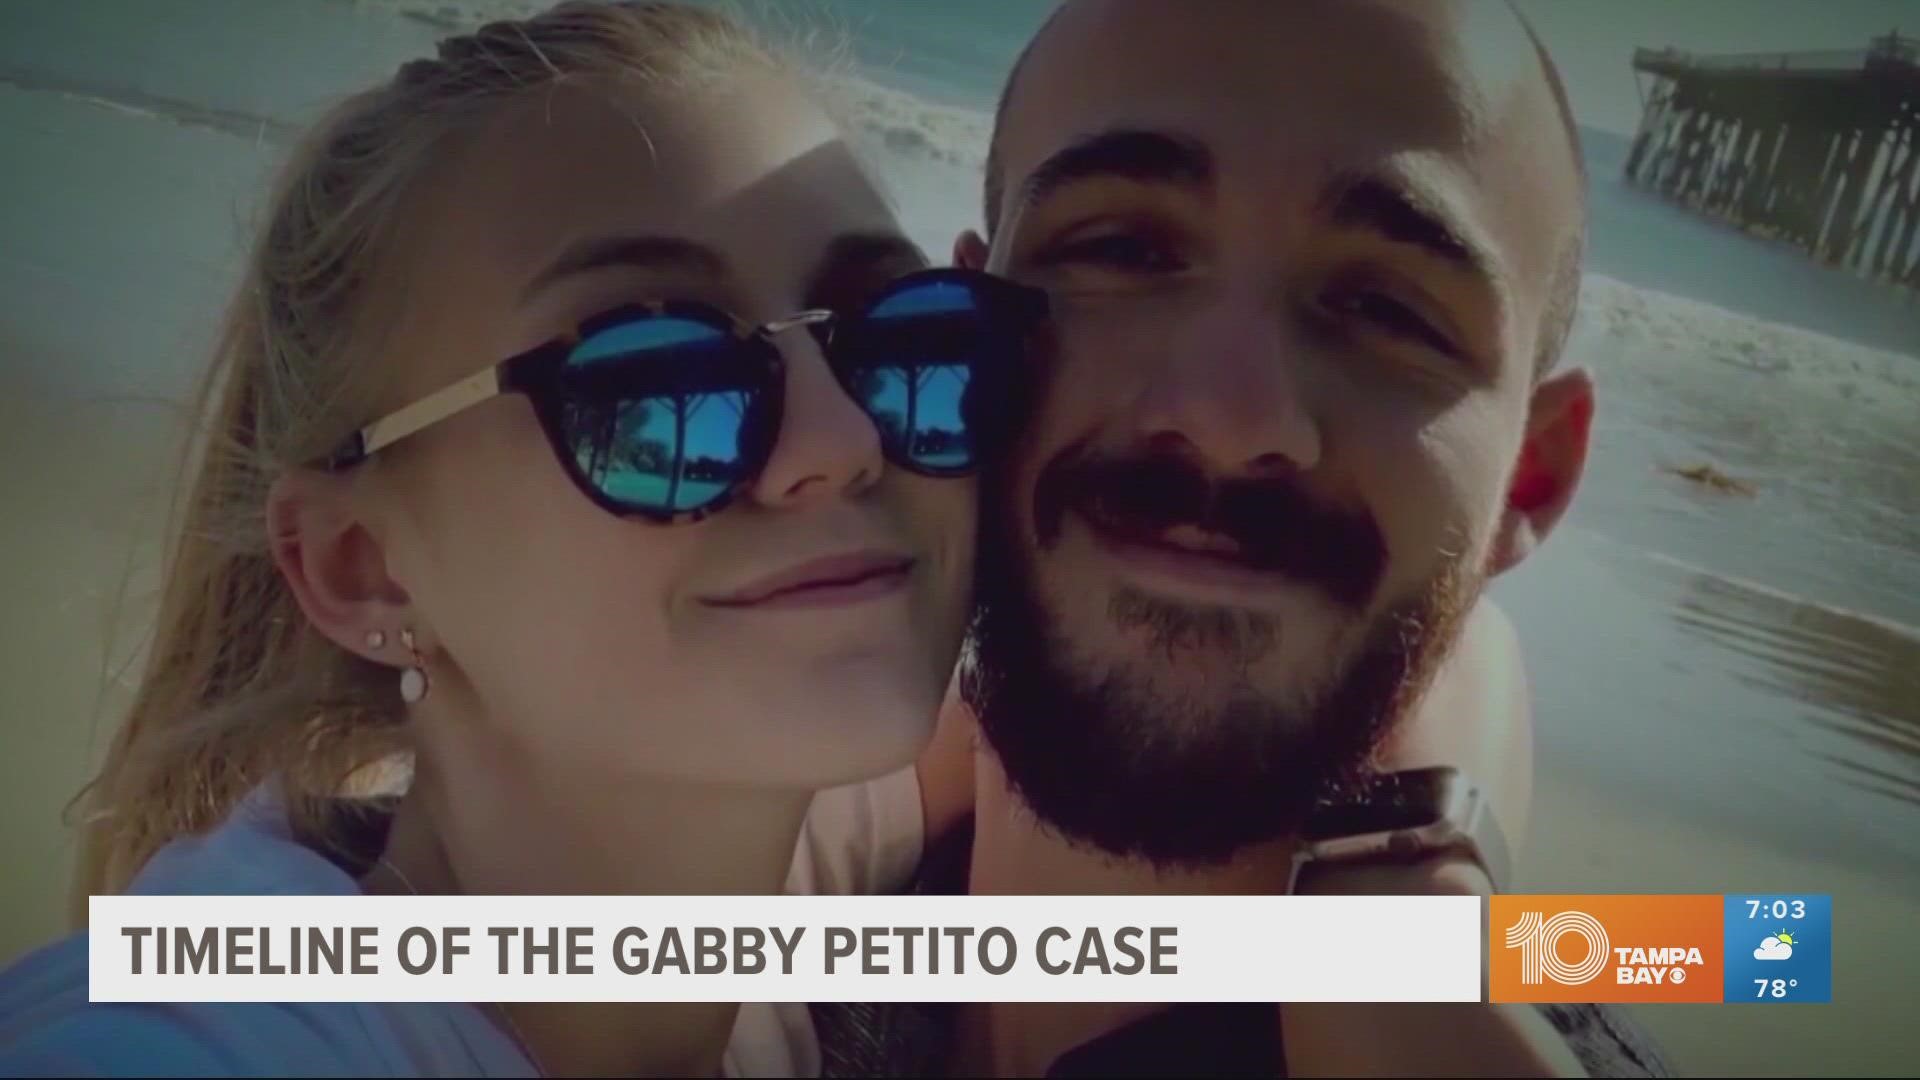 One year ago today, Gabby Petito's parents reported her missing.